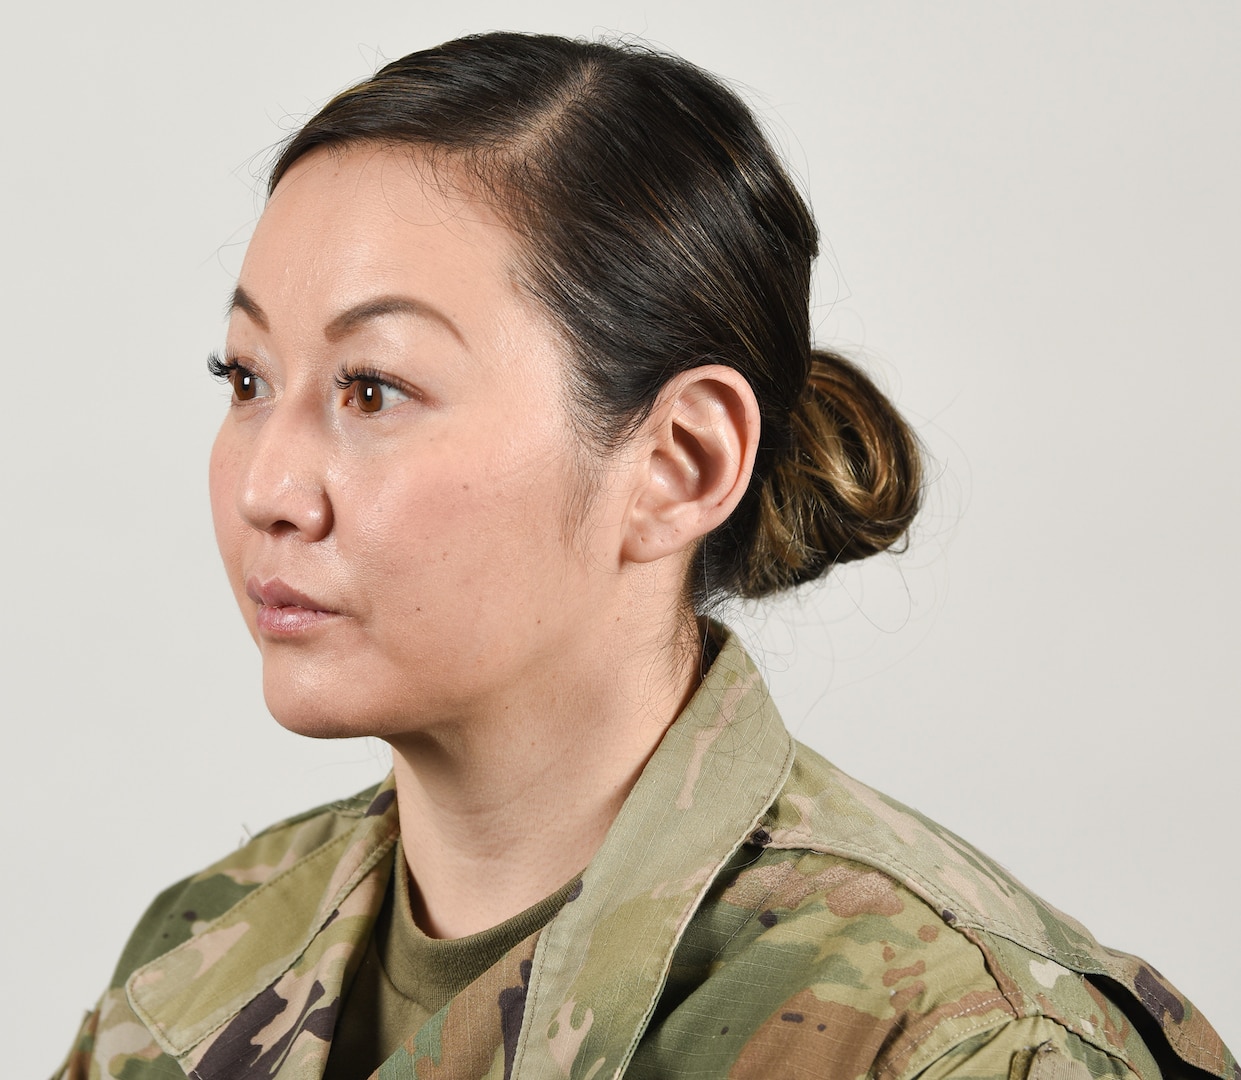 A female Soldier poses for an example photo with medium-length hair secured into a ponytail to support an upcoming change in Army grooming and appearance standards. Medium-length ponytails are only authorized for wear on the back of the scalp and cannot exceed the head's width or interfere with a Soldier's headgear.